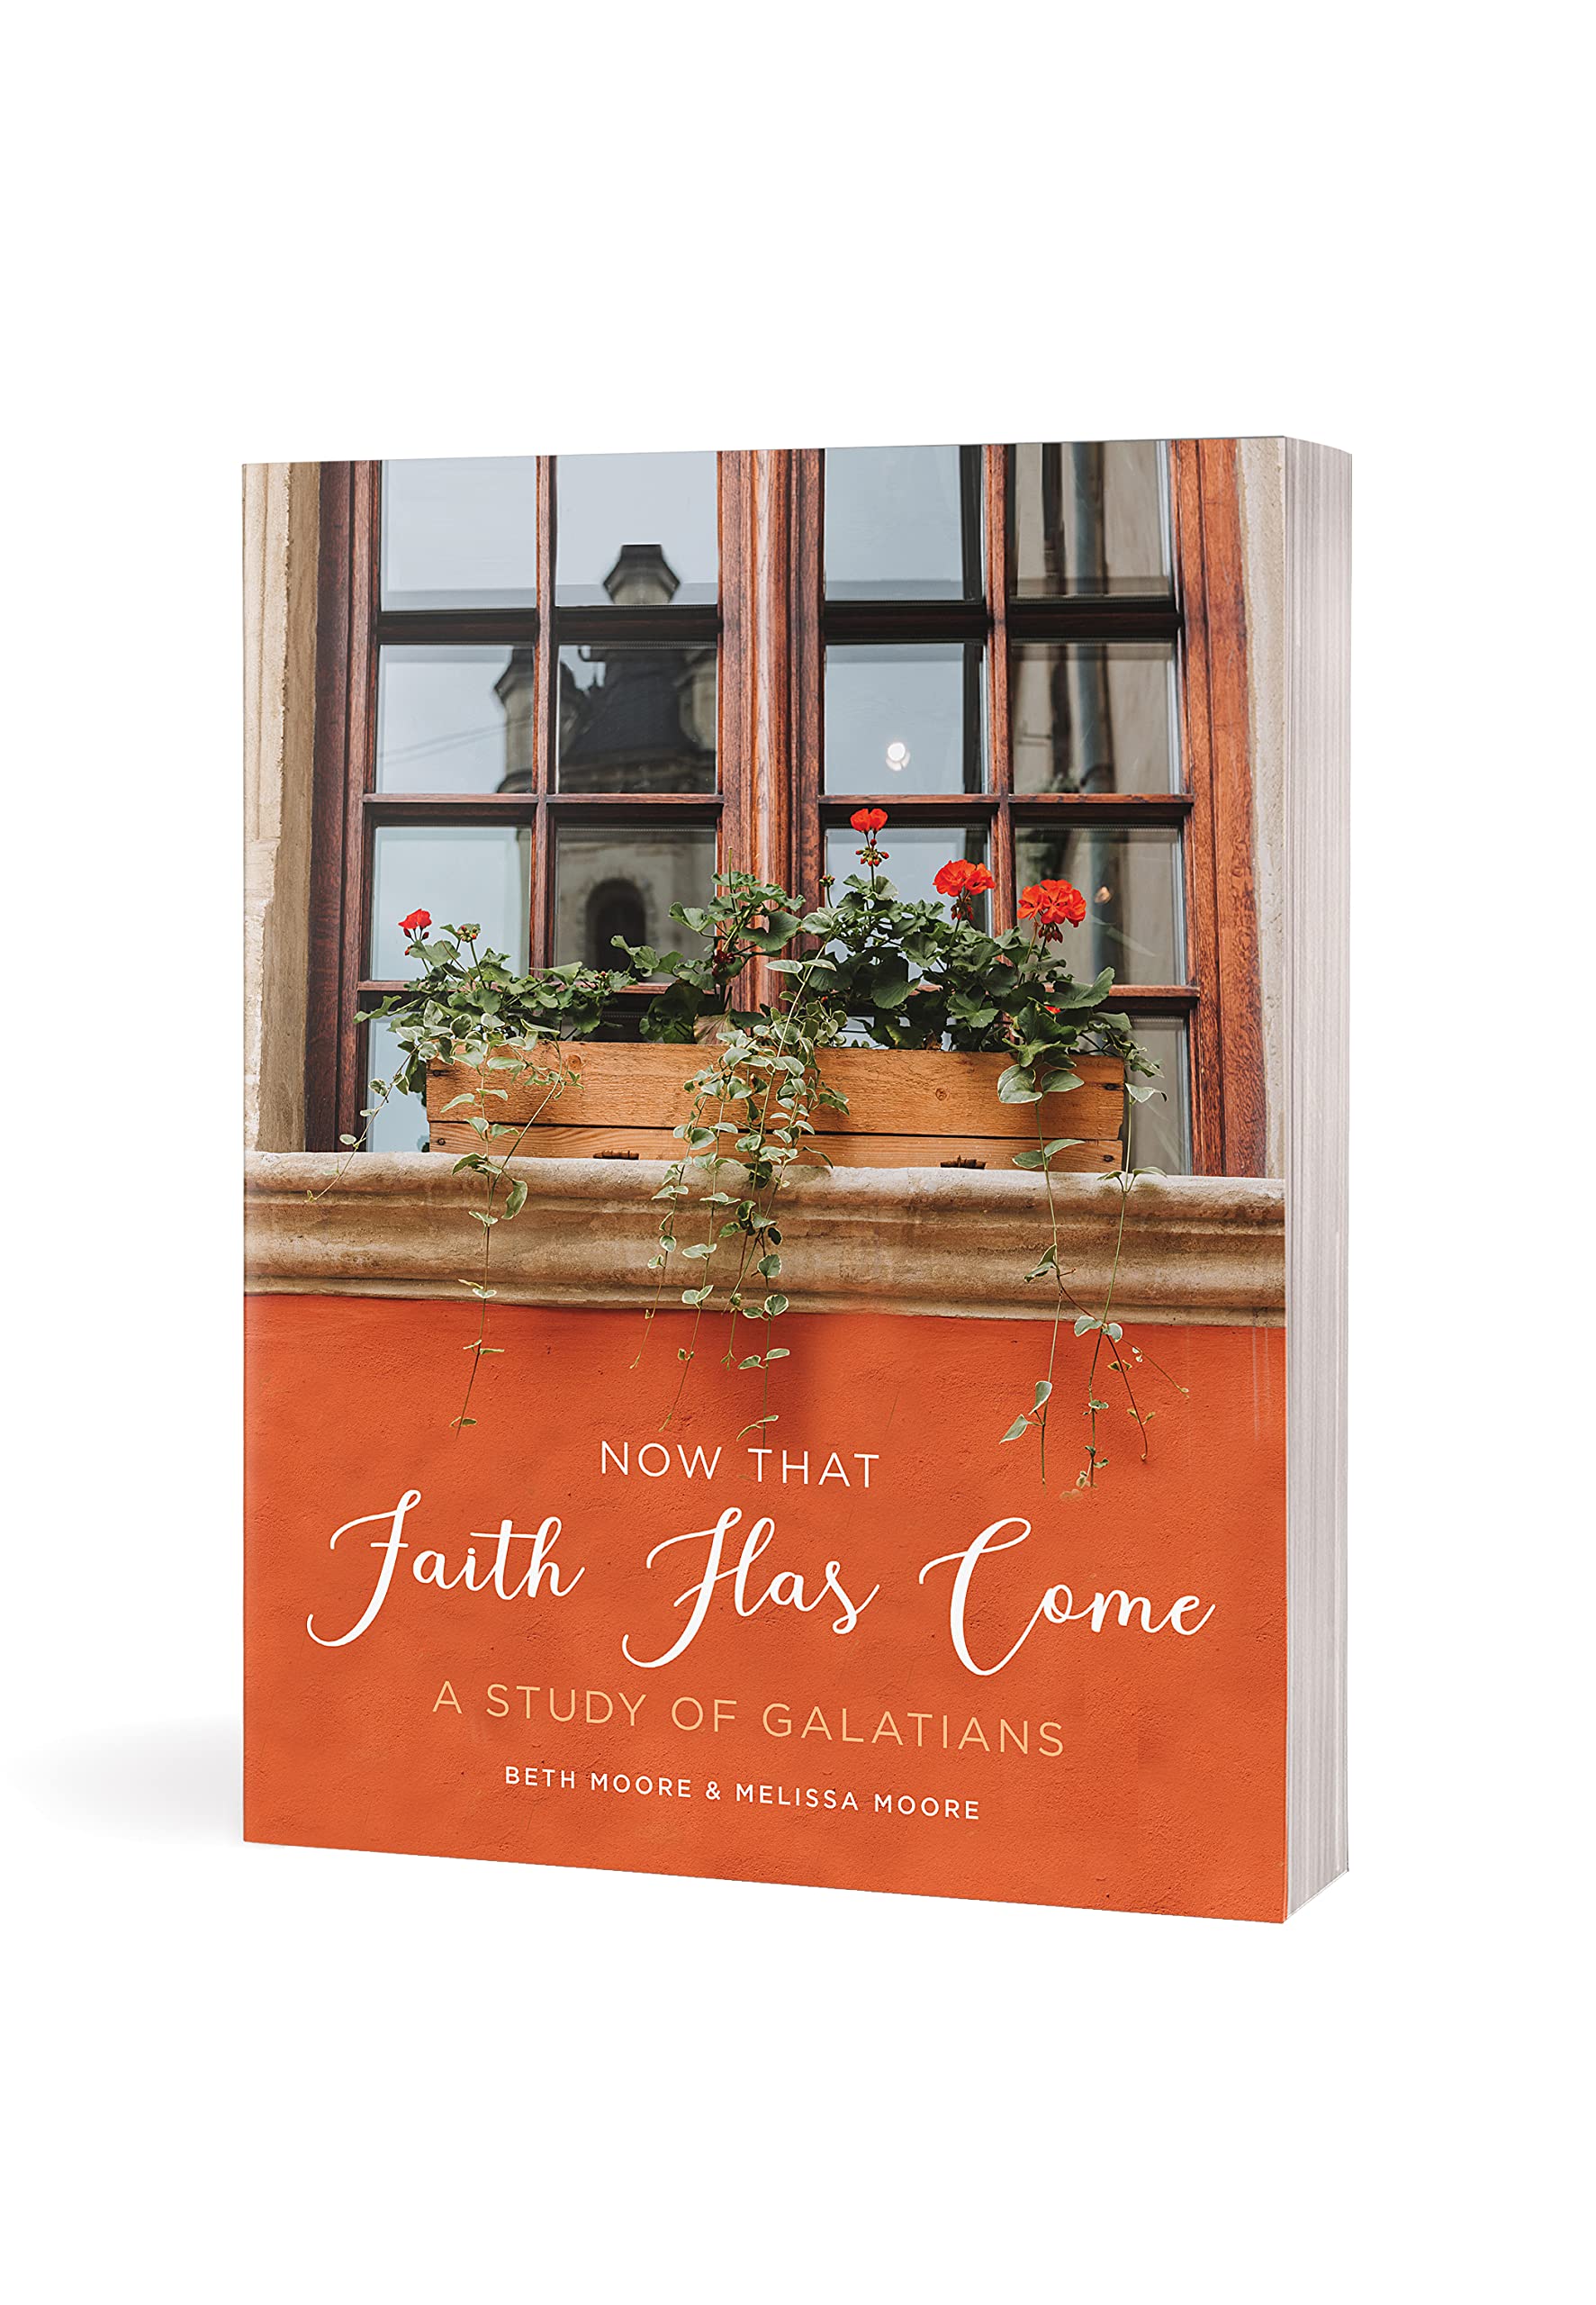 Now That Faith Has Come: A Study of Galatians (6-Week Bible Study Guide Workbook & Companion to the Video Series - Perfect for Small Groups & Individual Study)